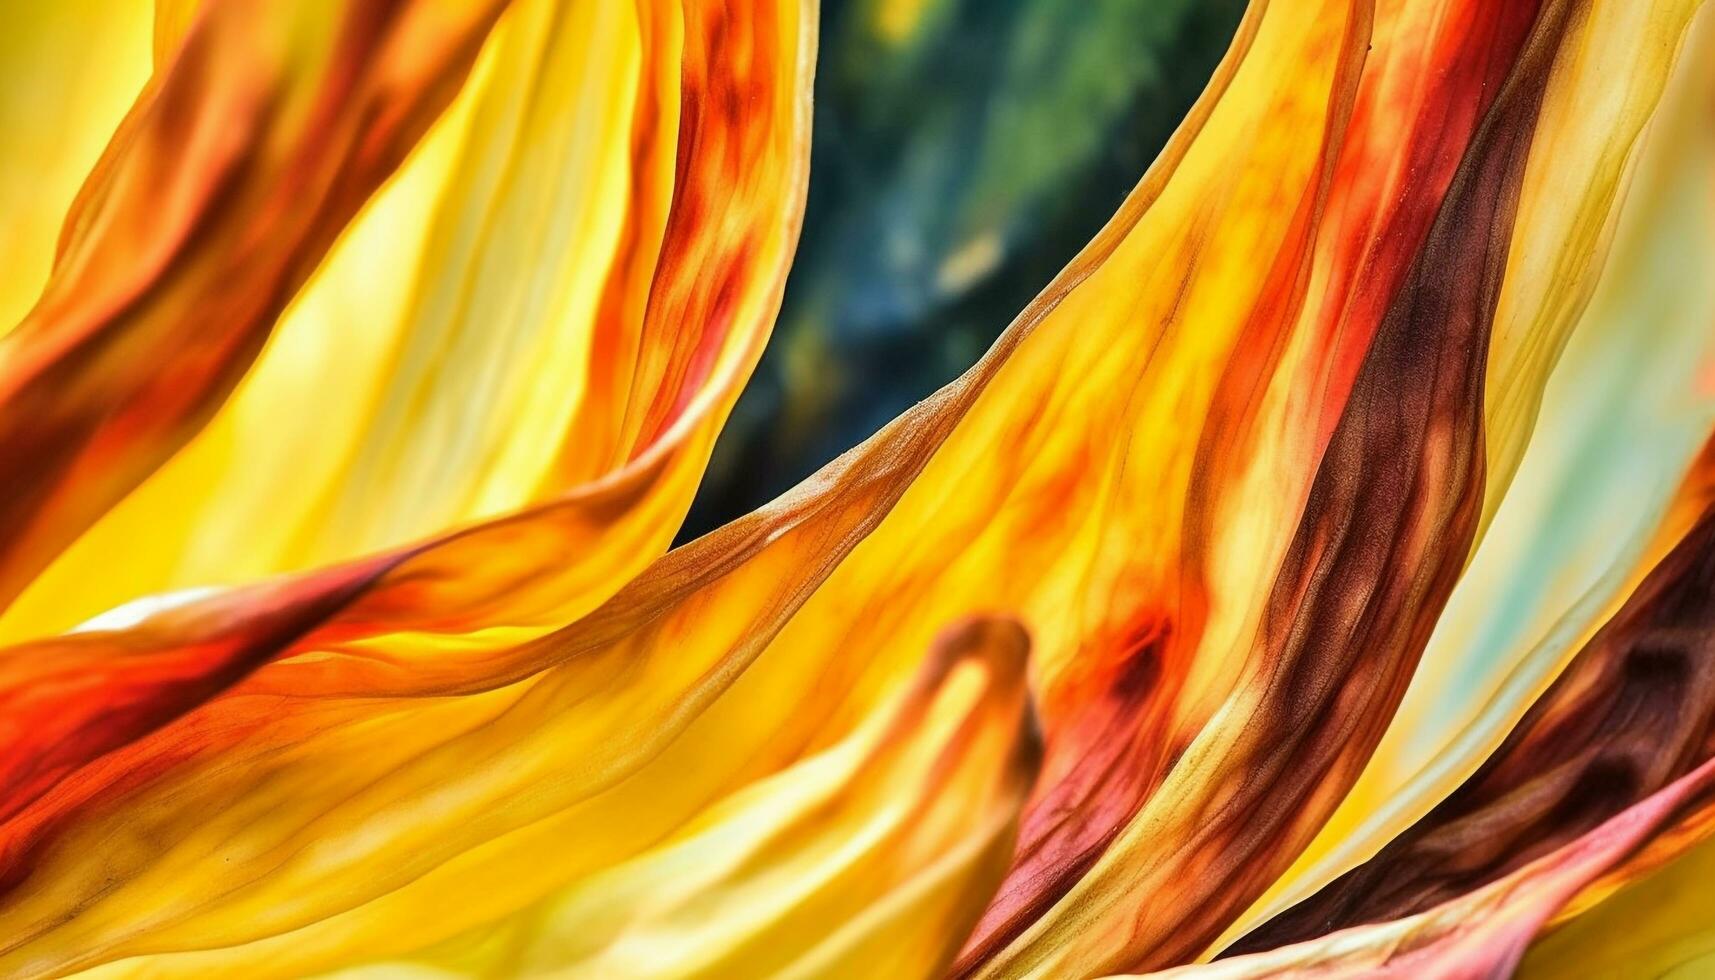 Vibrant colors ignite natural phenomenon in a fiery inferno backdrop generated by AI photo